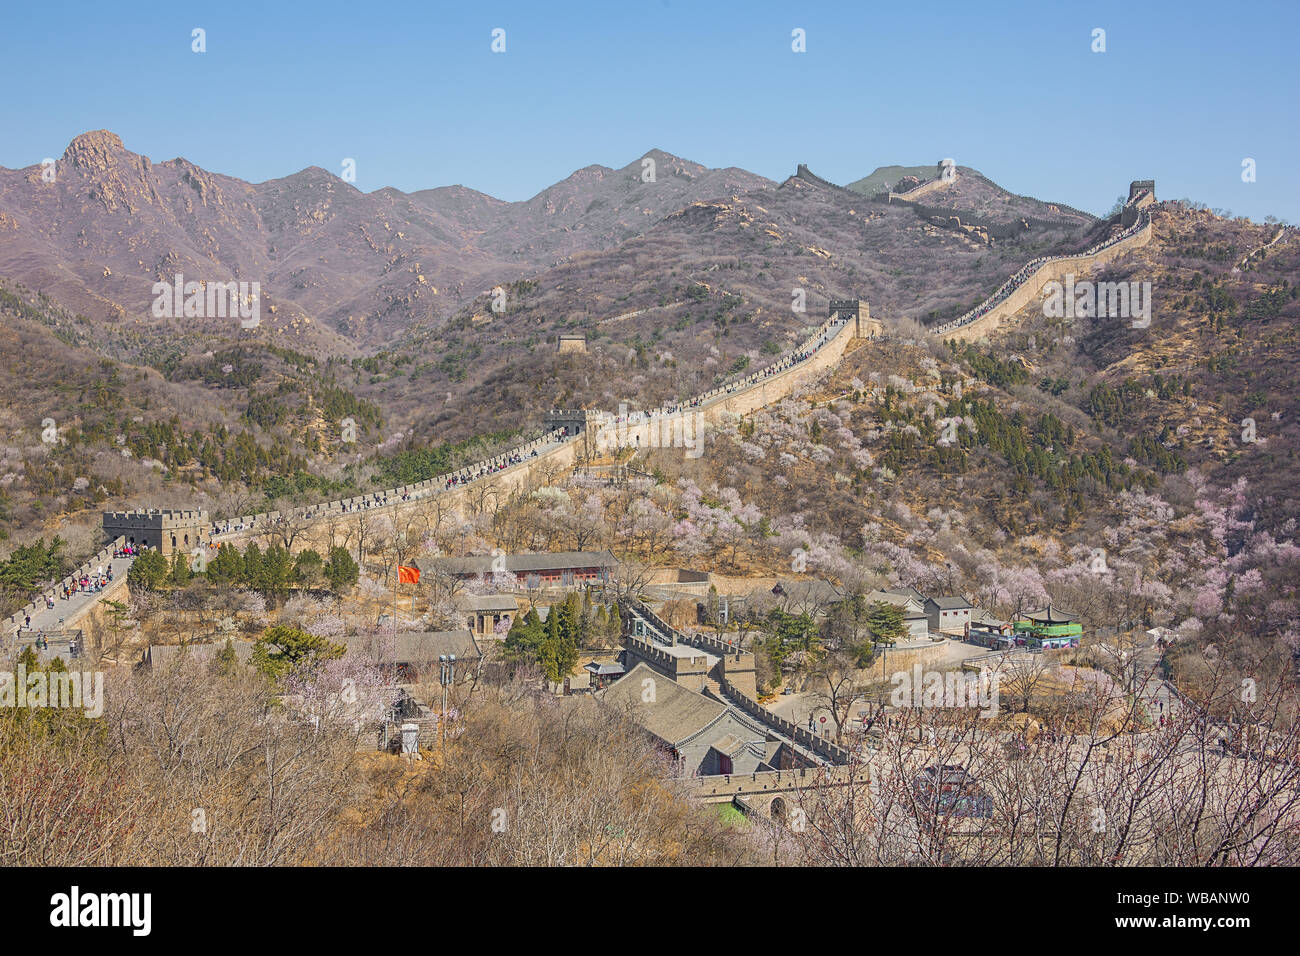 Editorial: BEIJING, CHINA, April 4, 2019 - The Great Wall visited by many tourists in Badaling Stock Photo